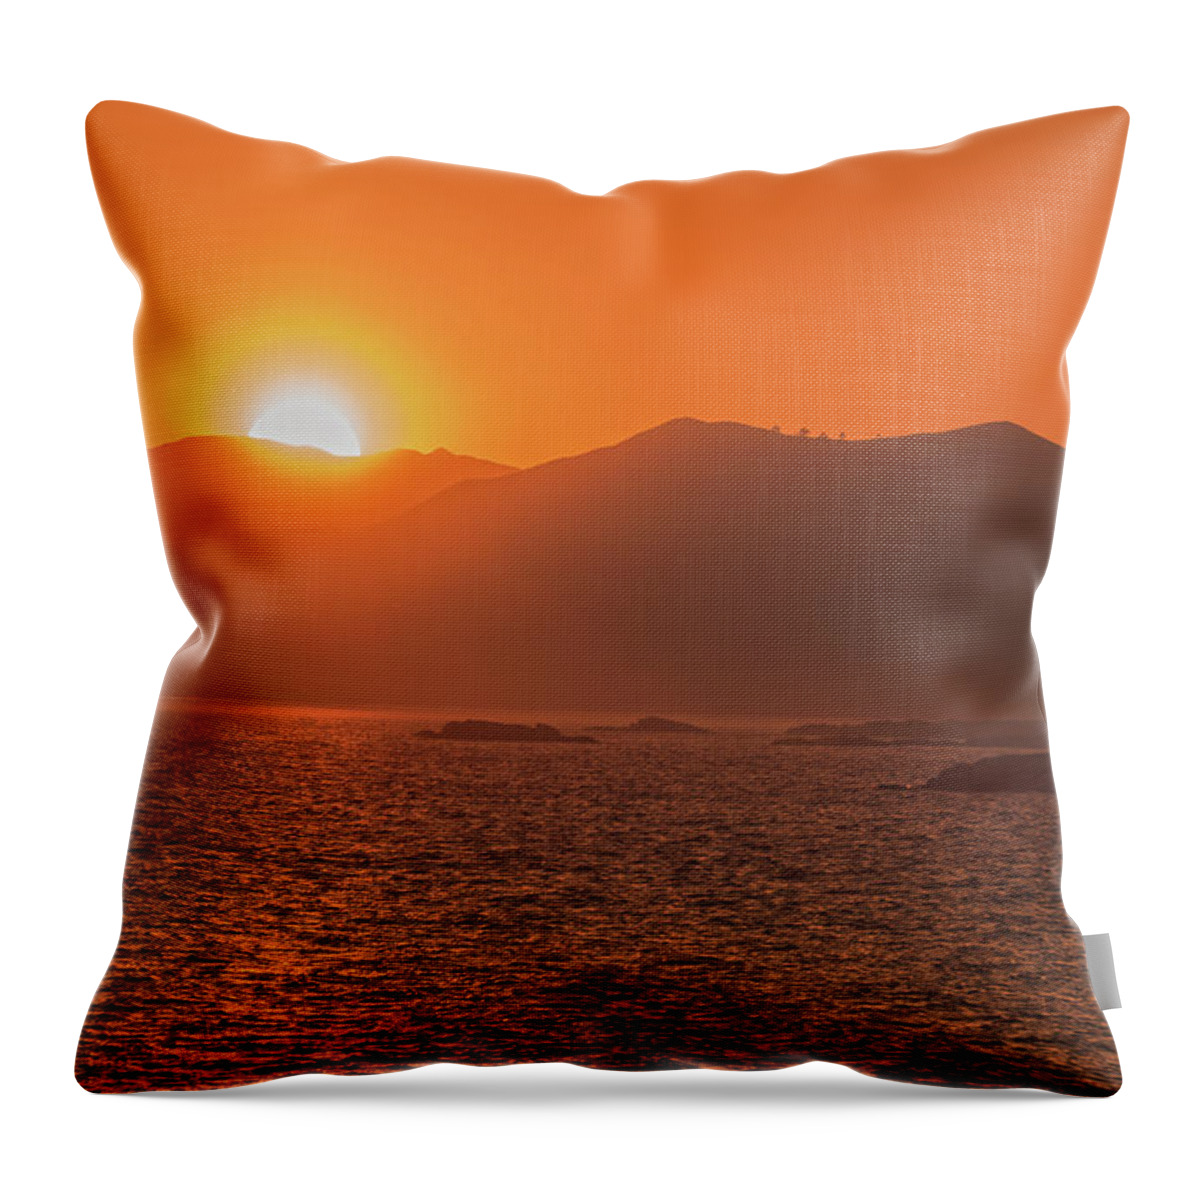 11-mile Reservoir Throw Pillow featuring the photograph A Wraith Of Smoke Shortly After A Forest Fire Is Extinguished by Bijan Pirnia